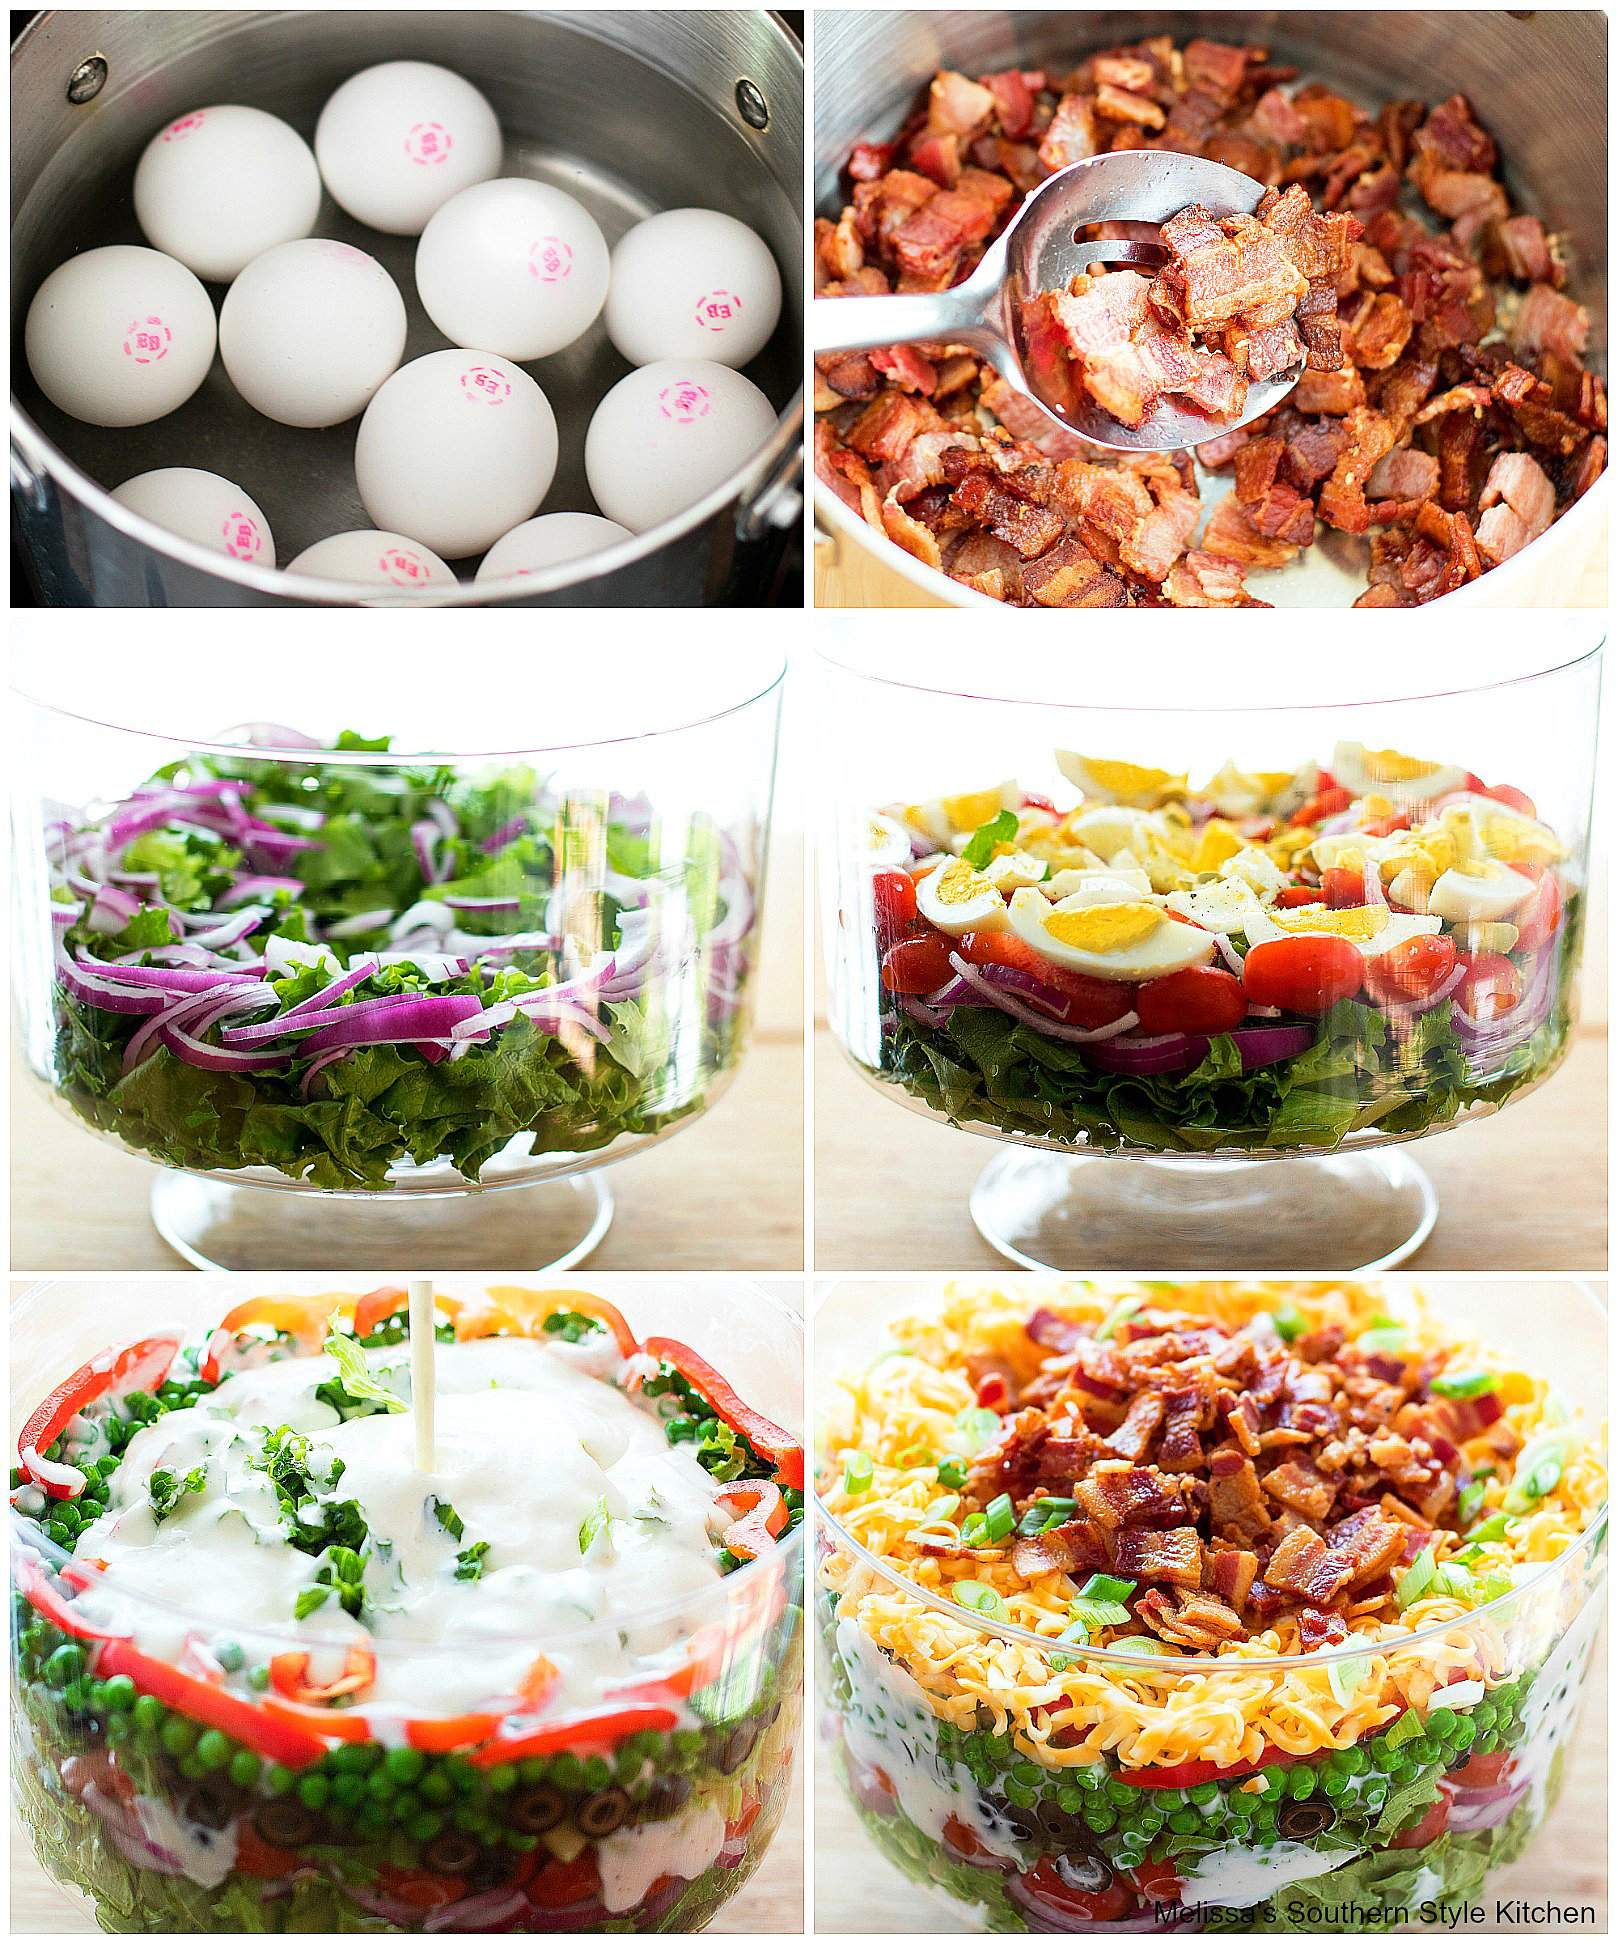 Step-by-step images to prepare Seven Layer Salad